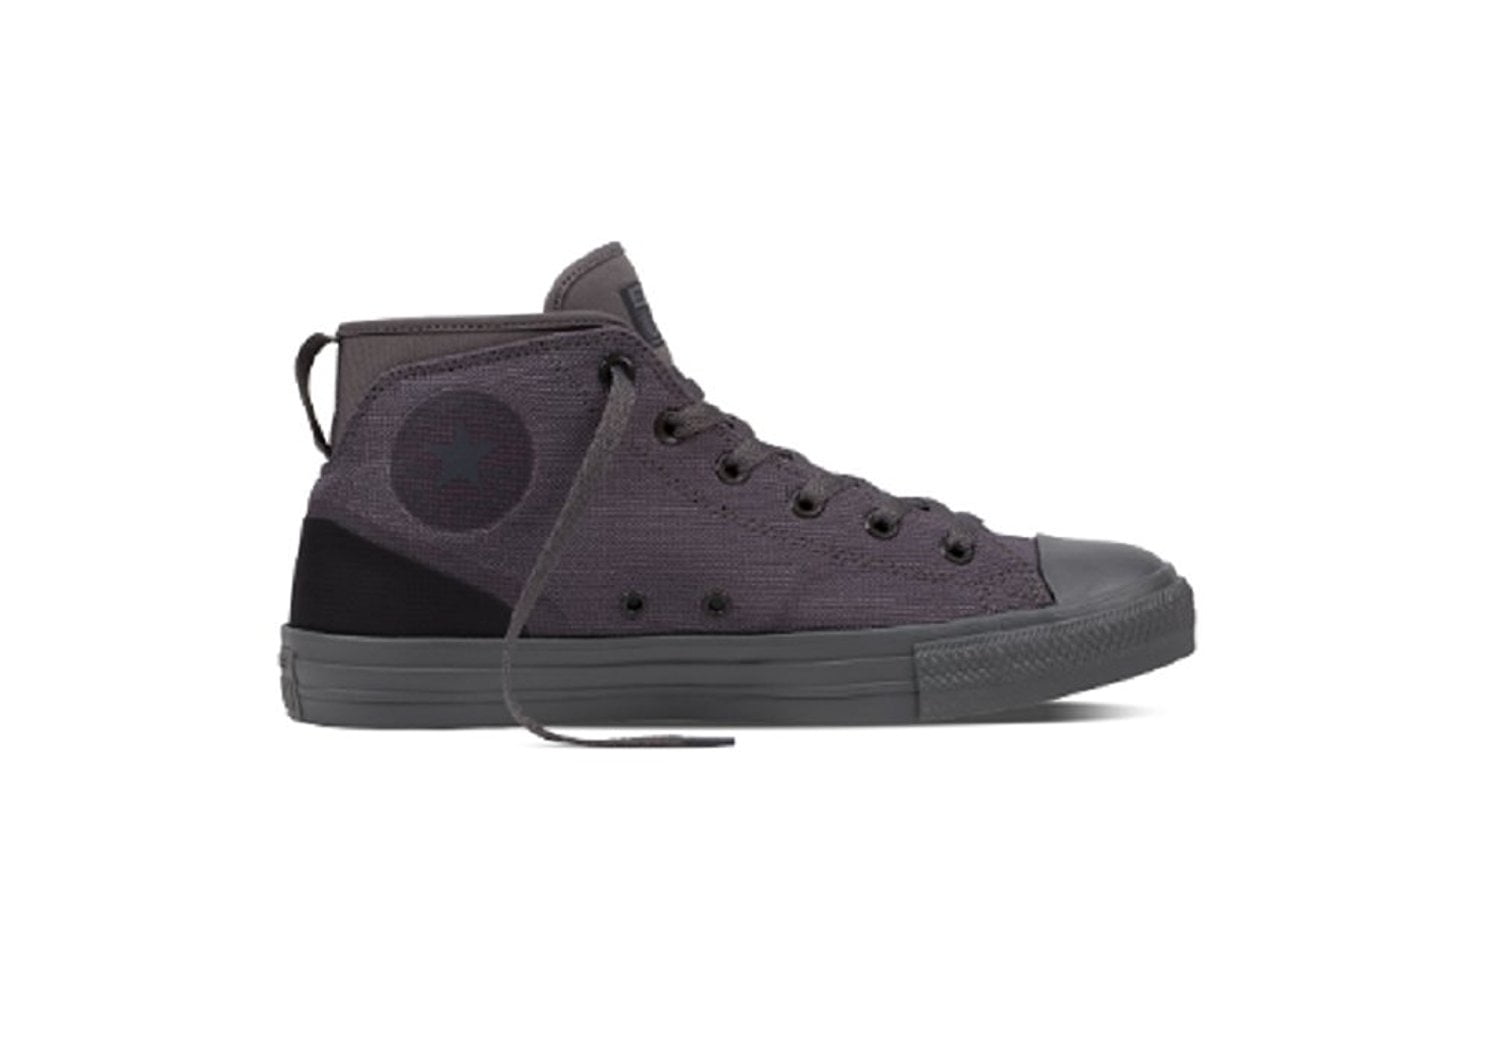 converse syde street mid